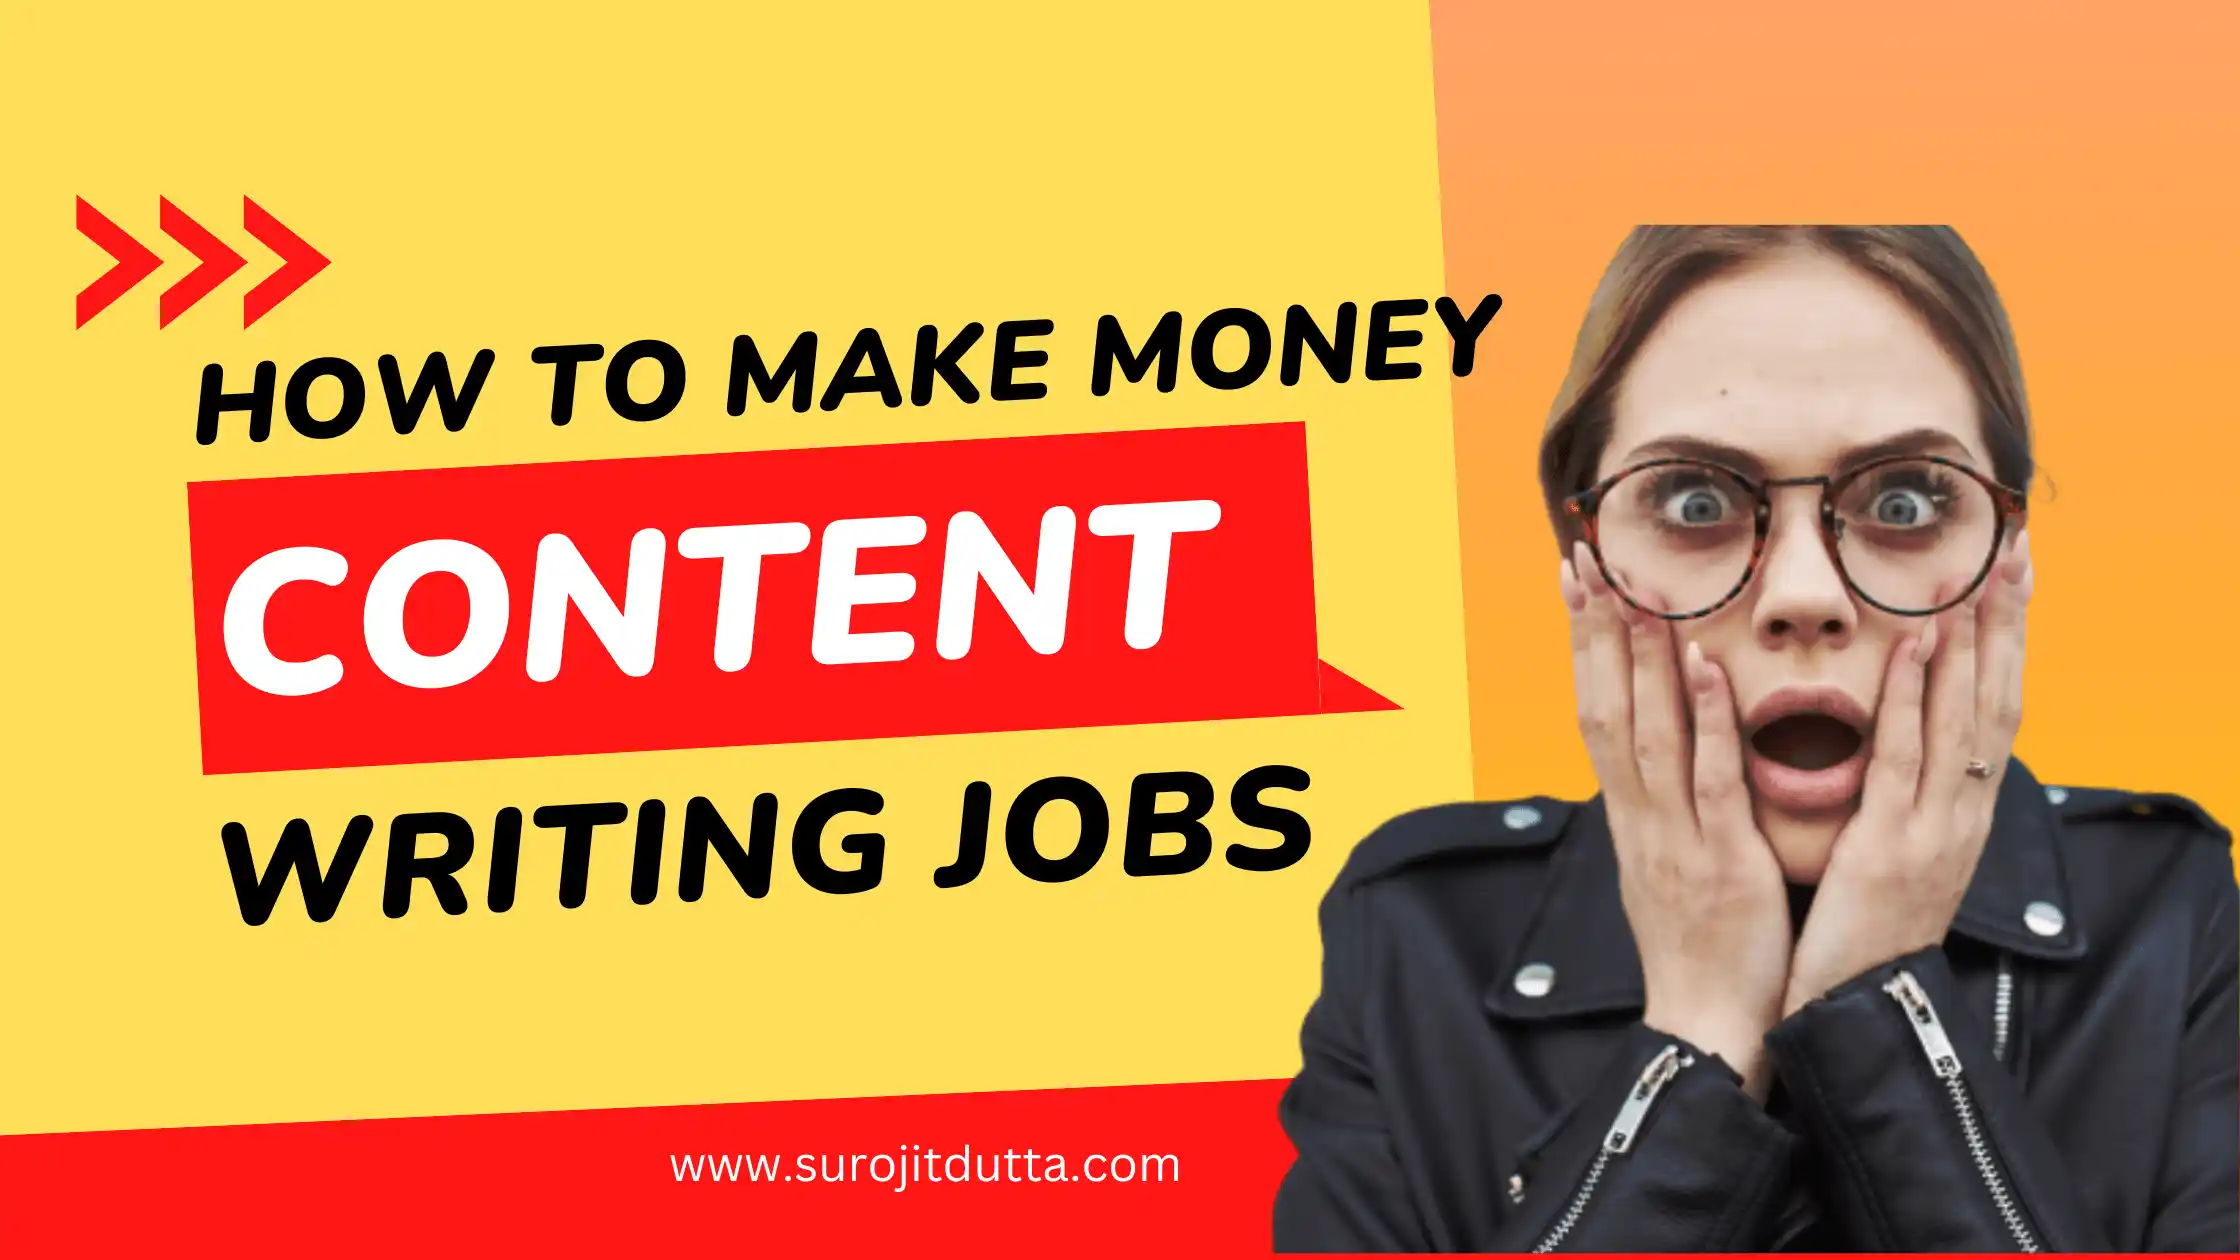 Tips on how to make money from creative writing jobs